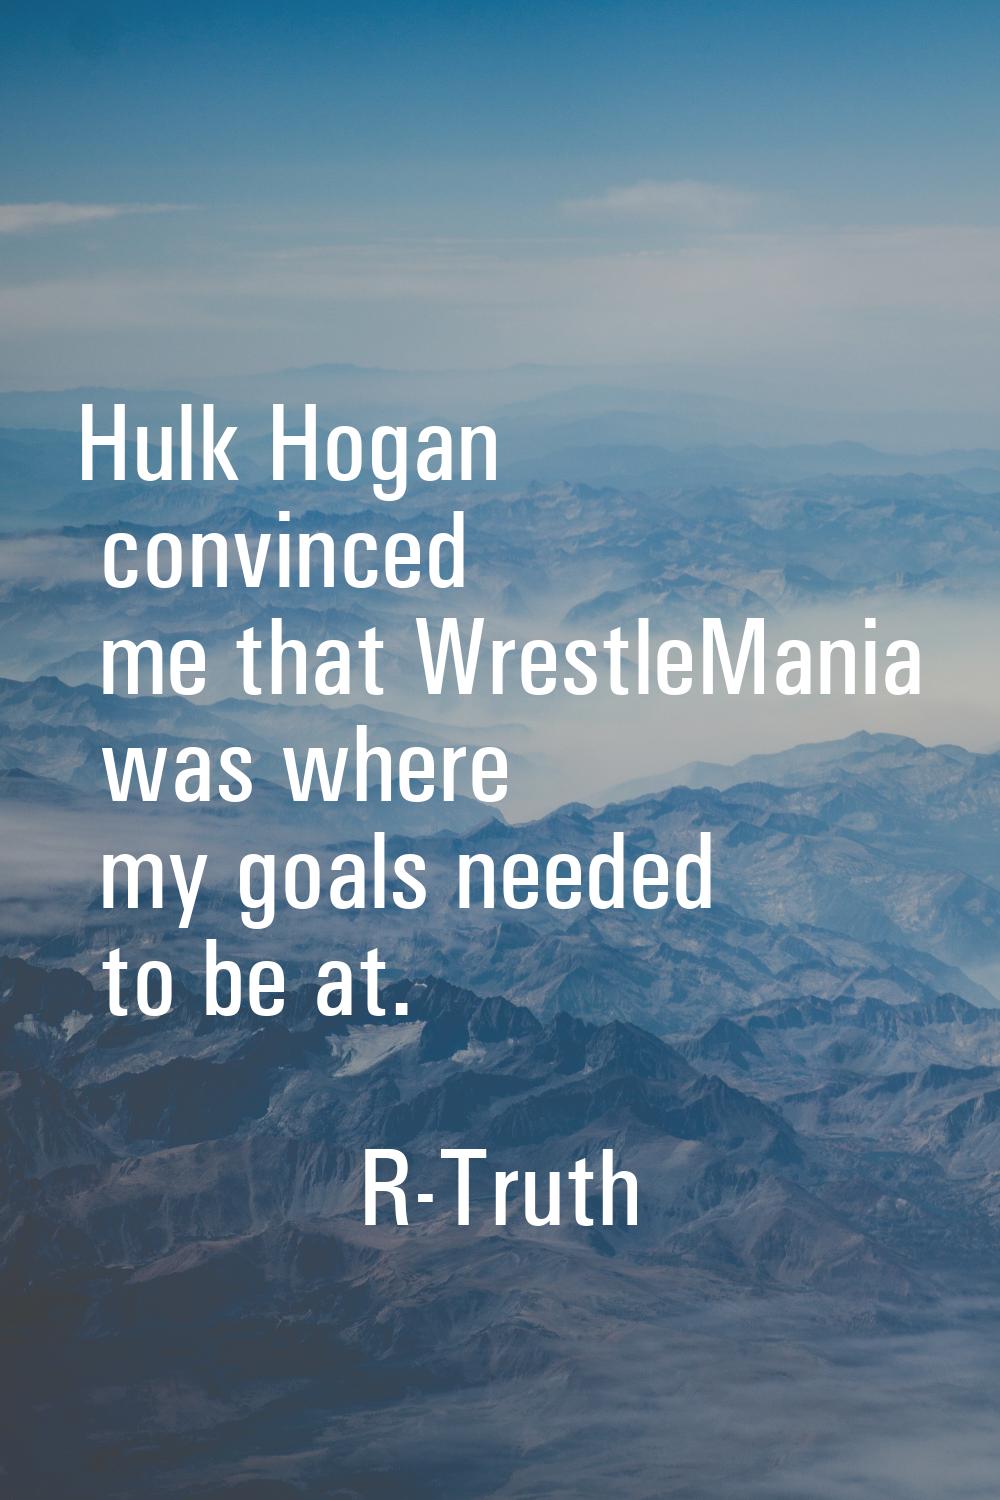 Hulk Hogan convinced me that WrestleMania was where my goals needed to be at.